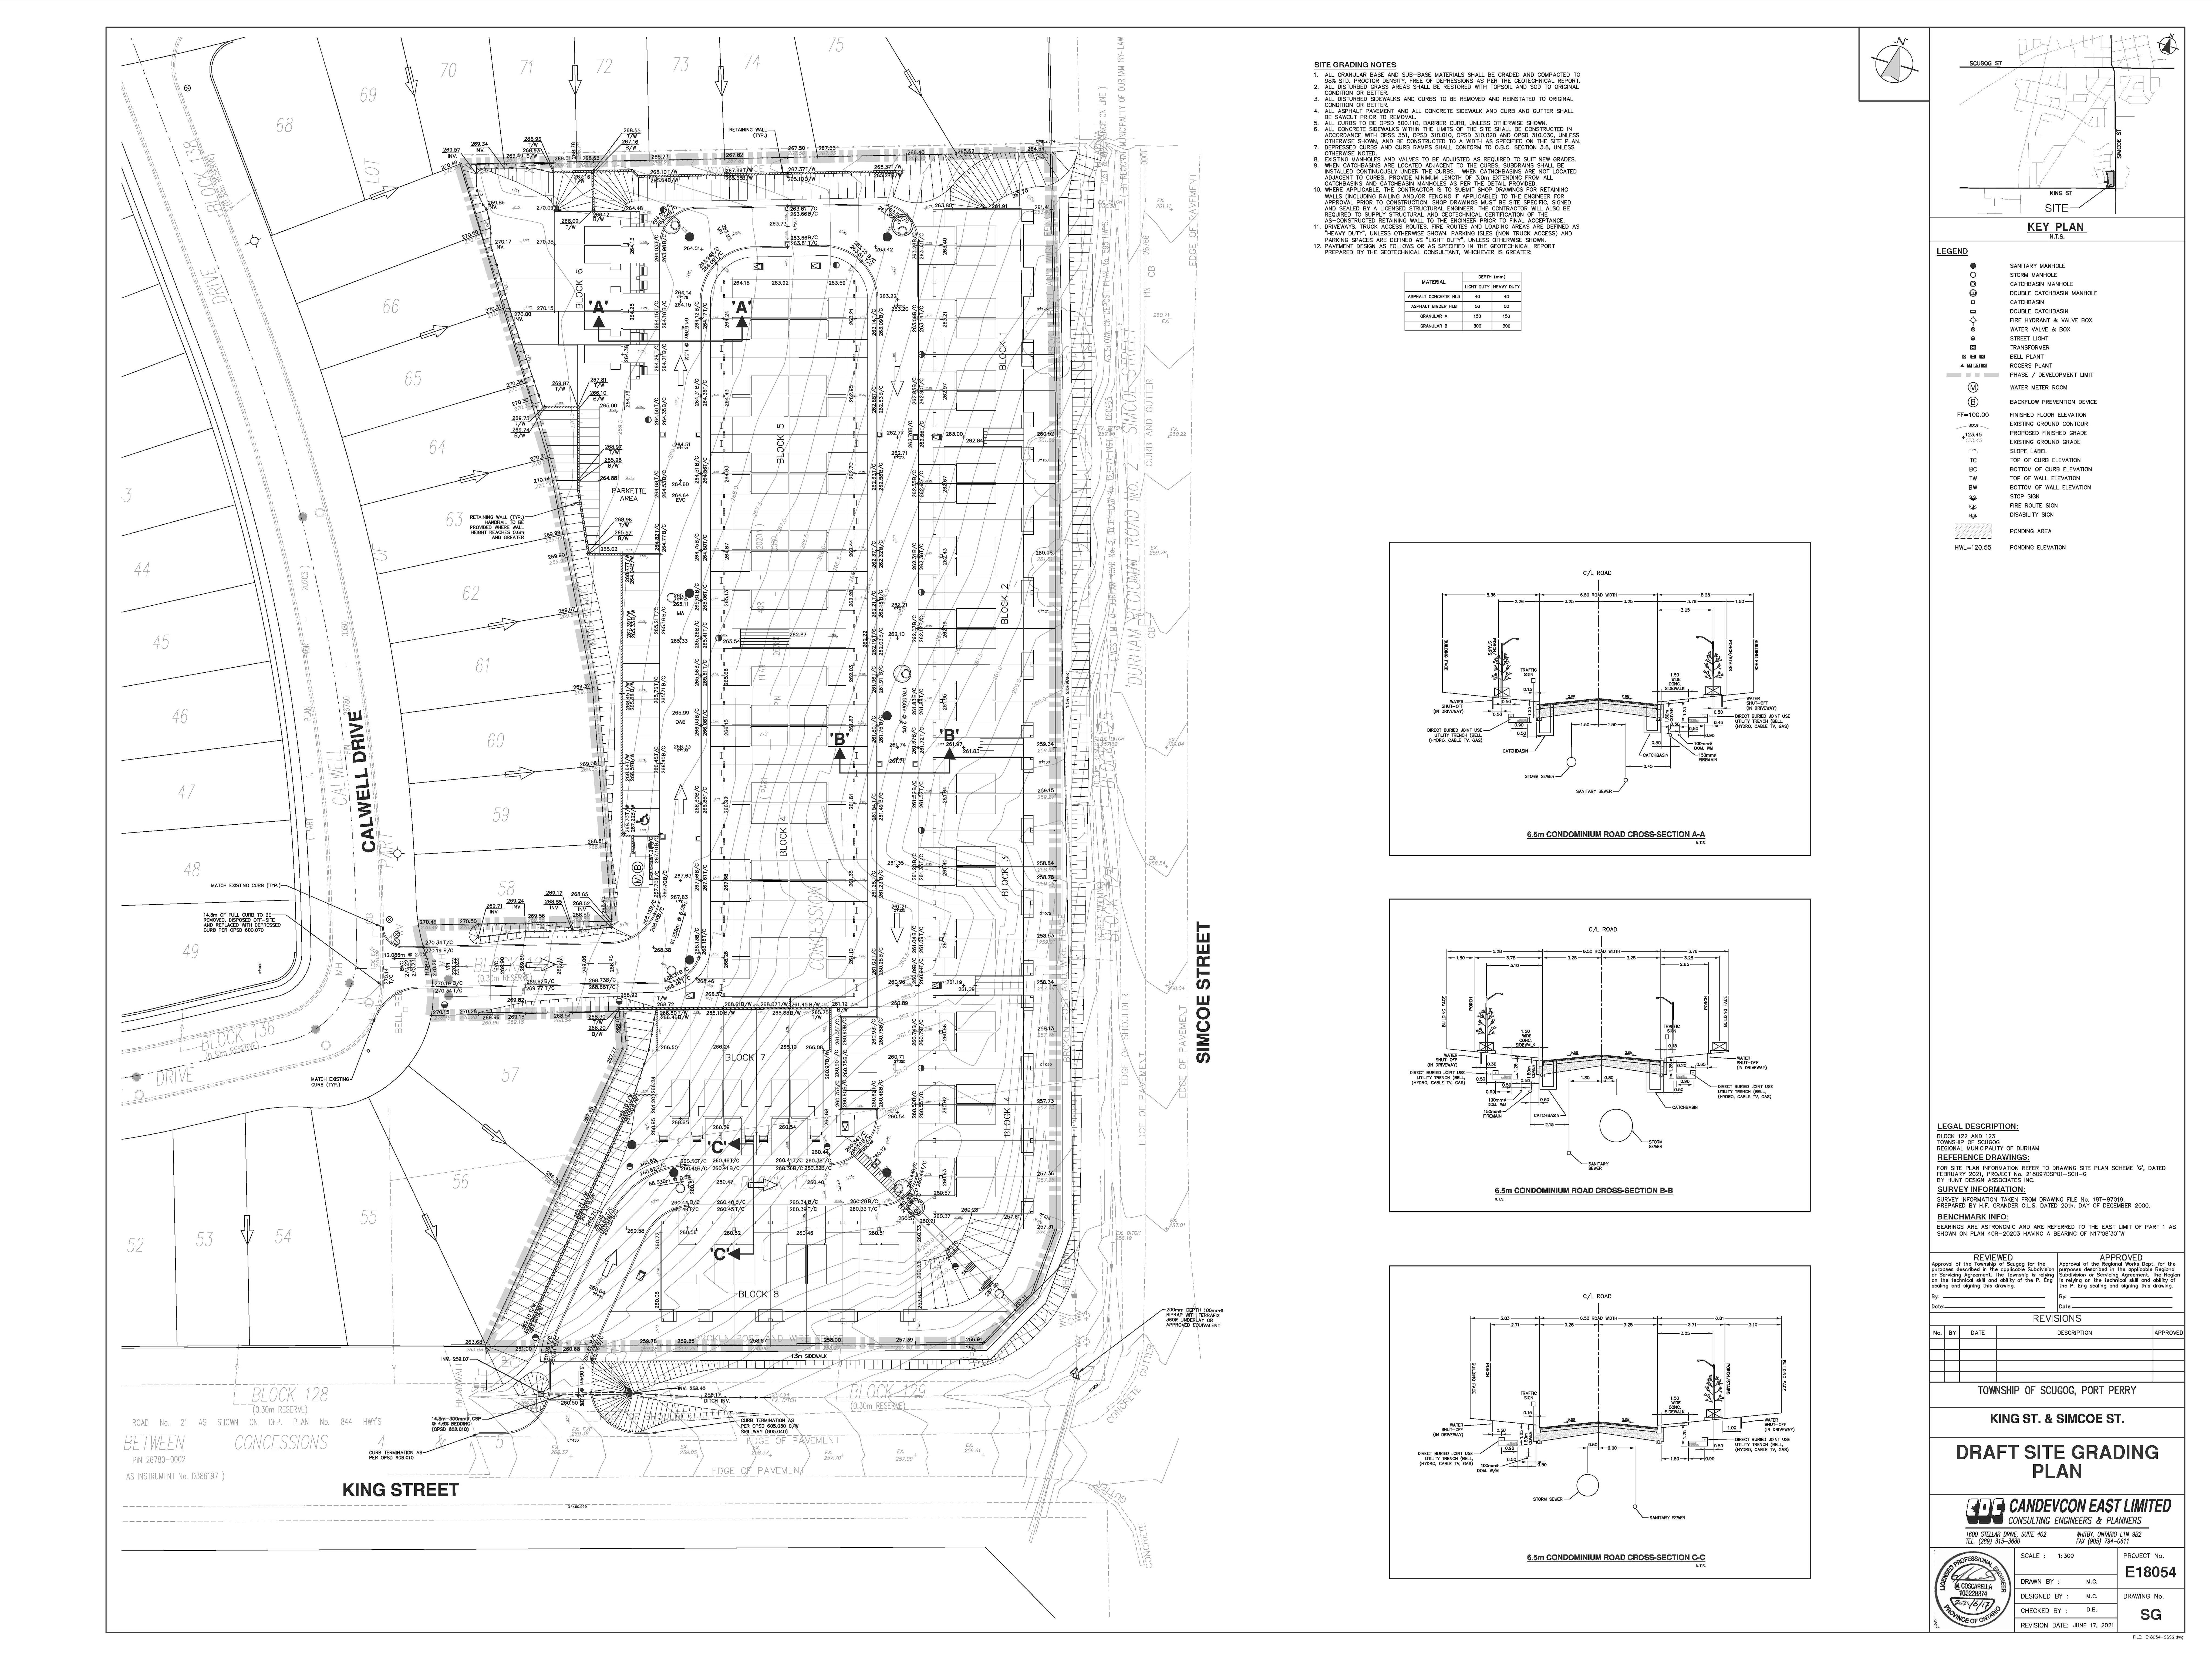 Proposed Site Grading Plan